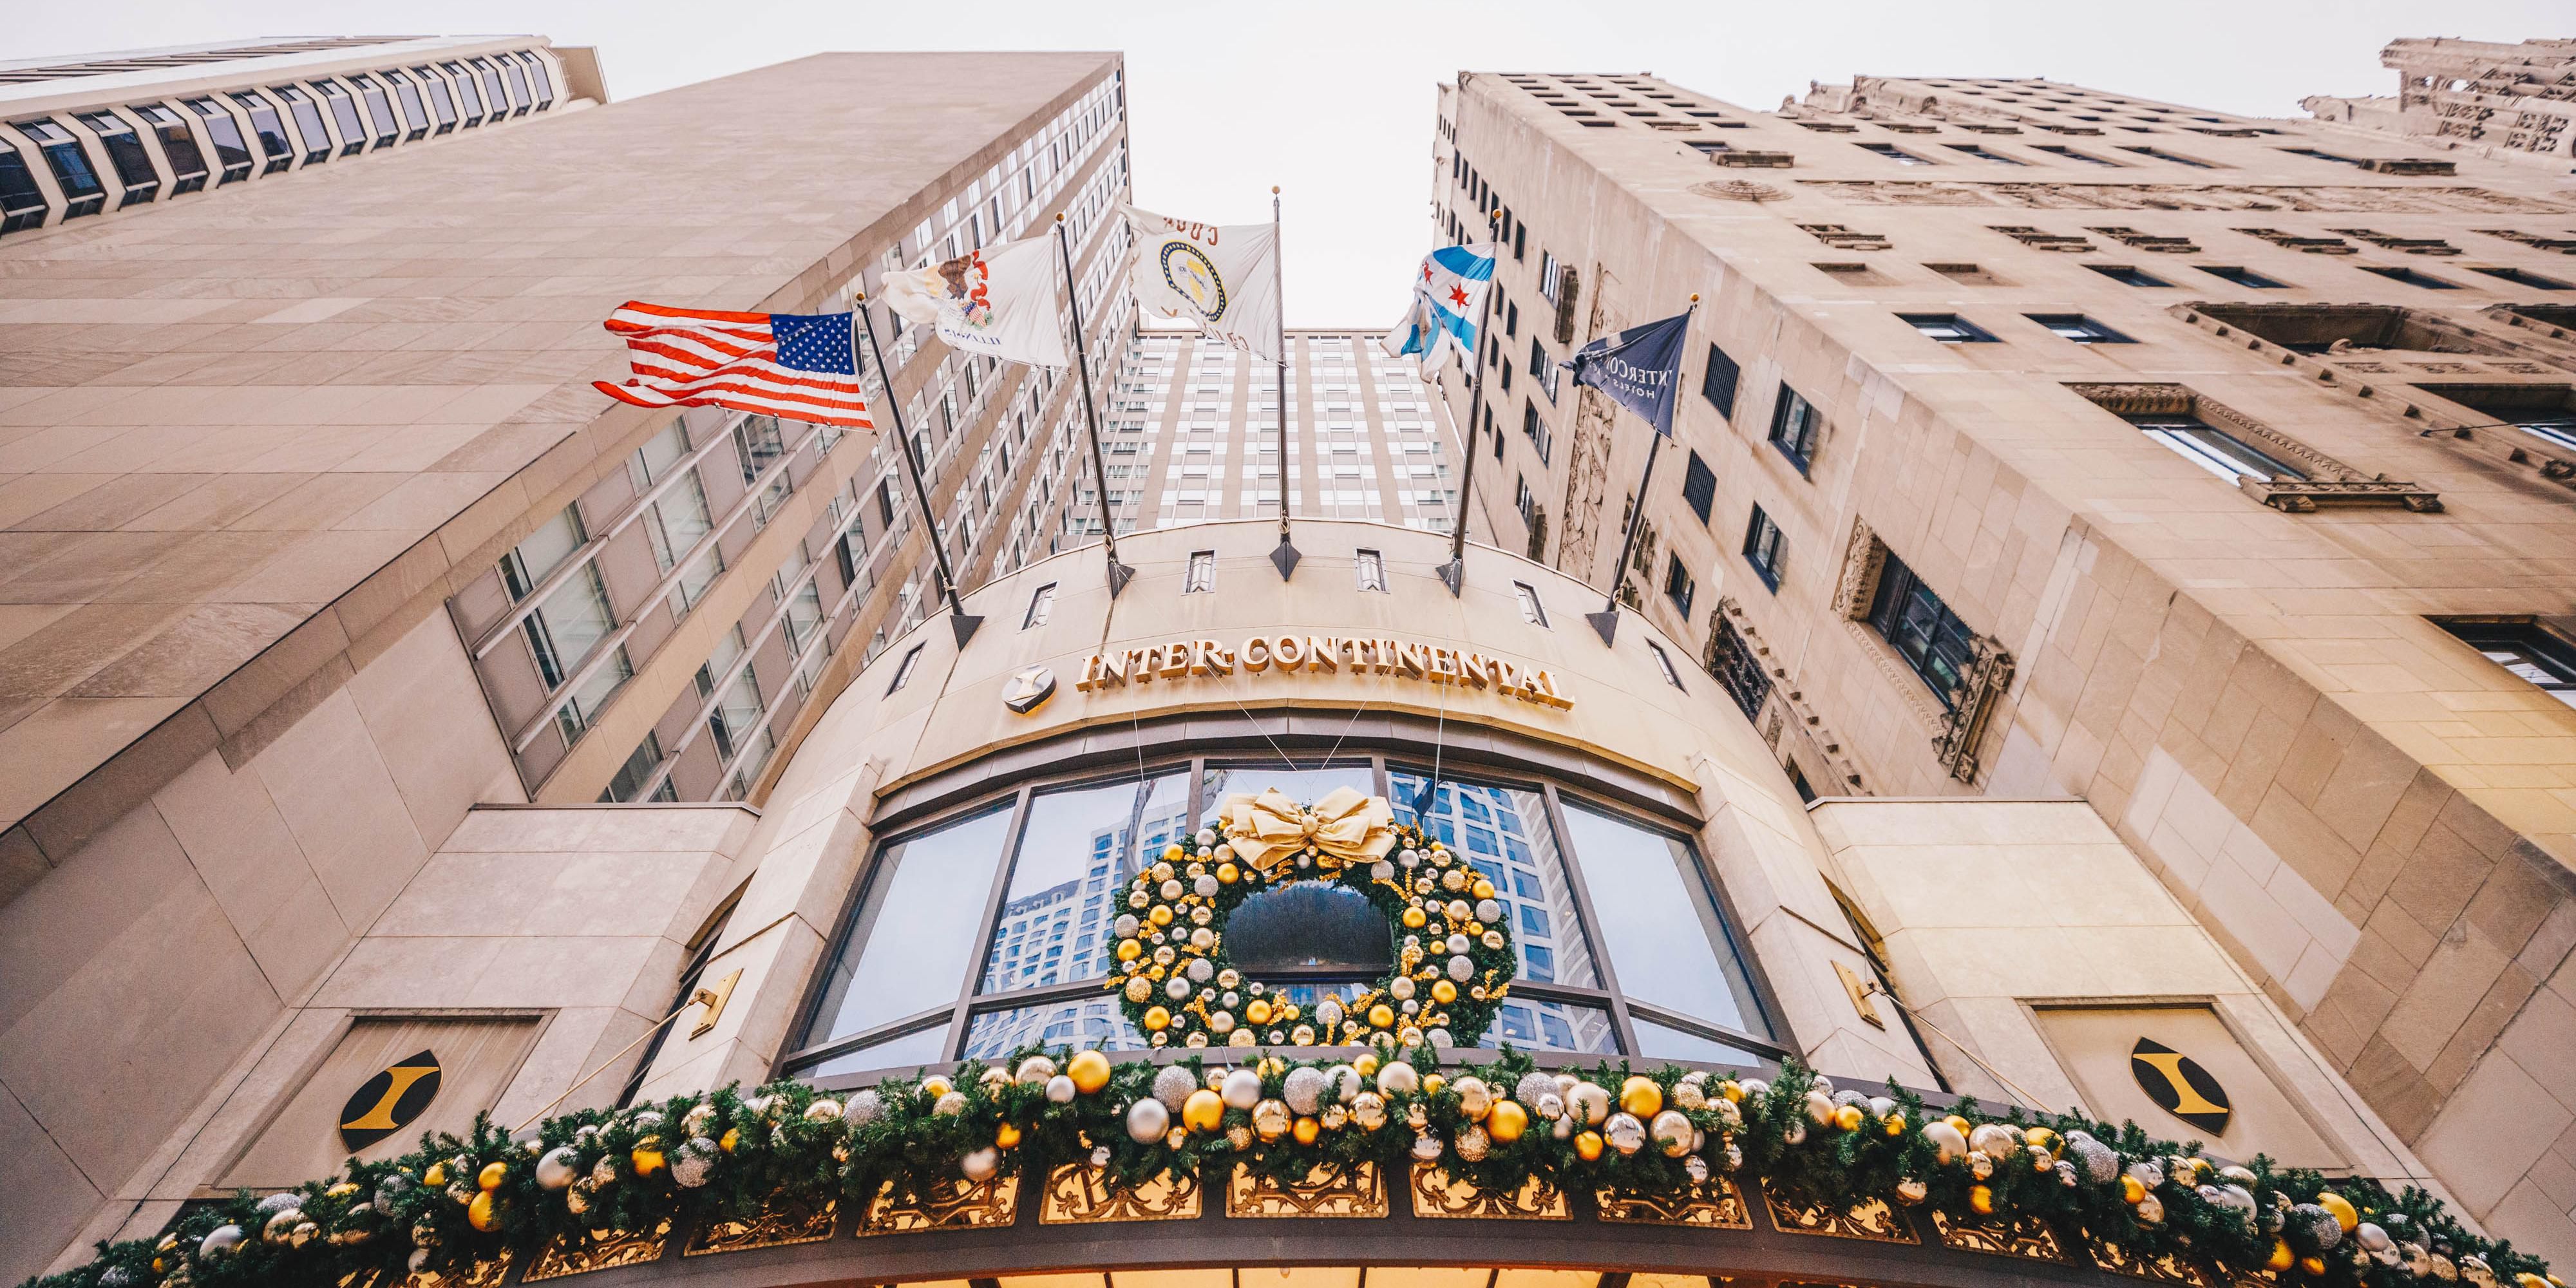 Our hotel was originally built in 1929 as the men’s Medinah Athletic Club, during which time Olympic gold medalist and Tarzan actor, Johnny Wiessmuller, used the swimming pool to train. The building became a hotel in 1944, and opened as InterContinental Chicago Magnificent Mile in March 1990.